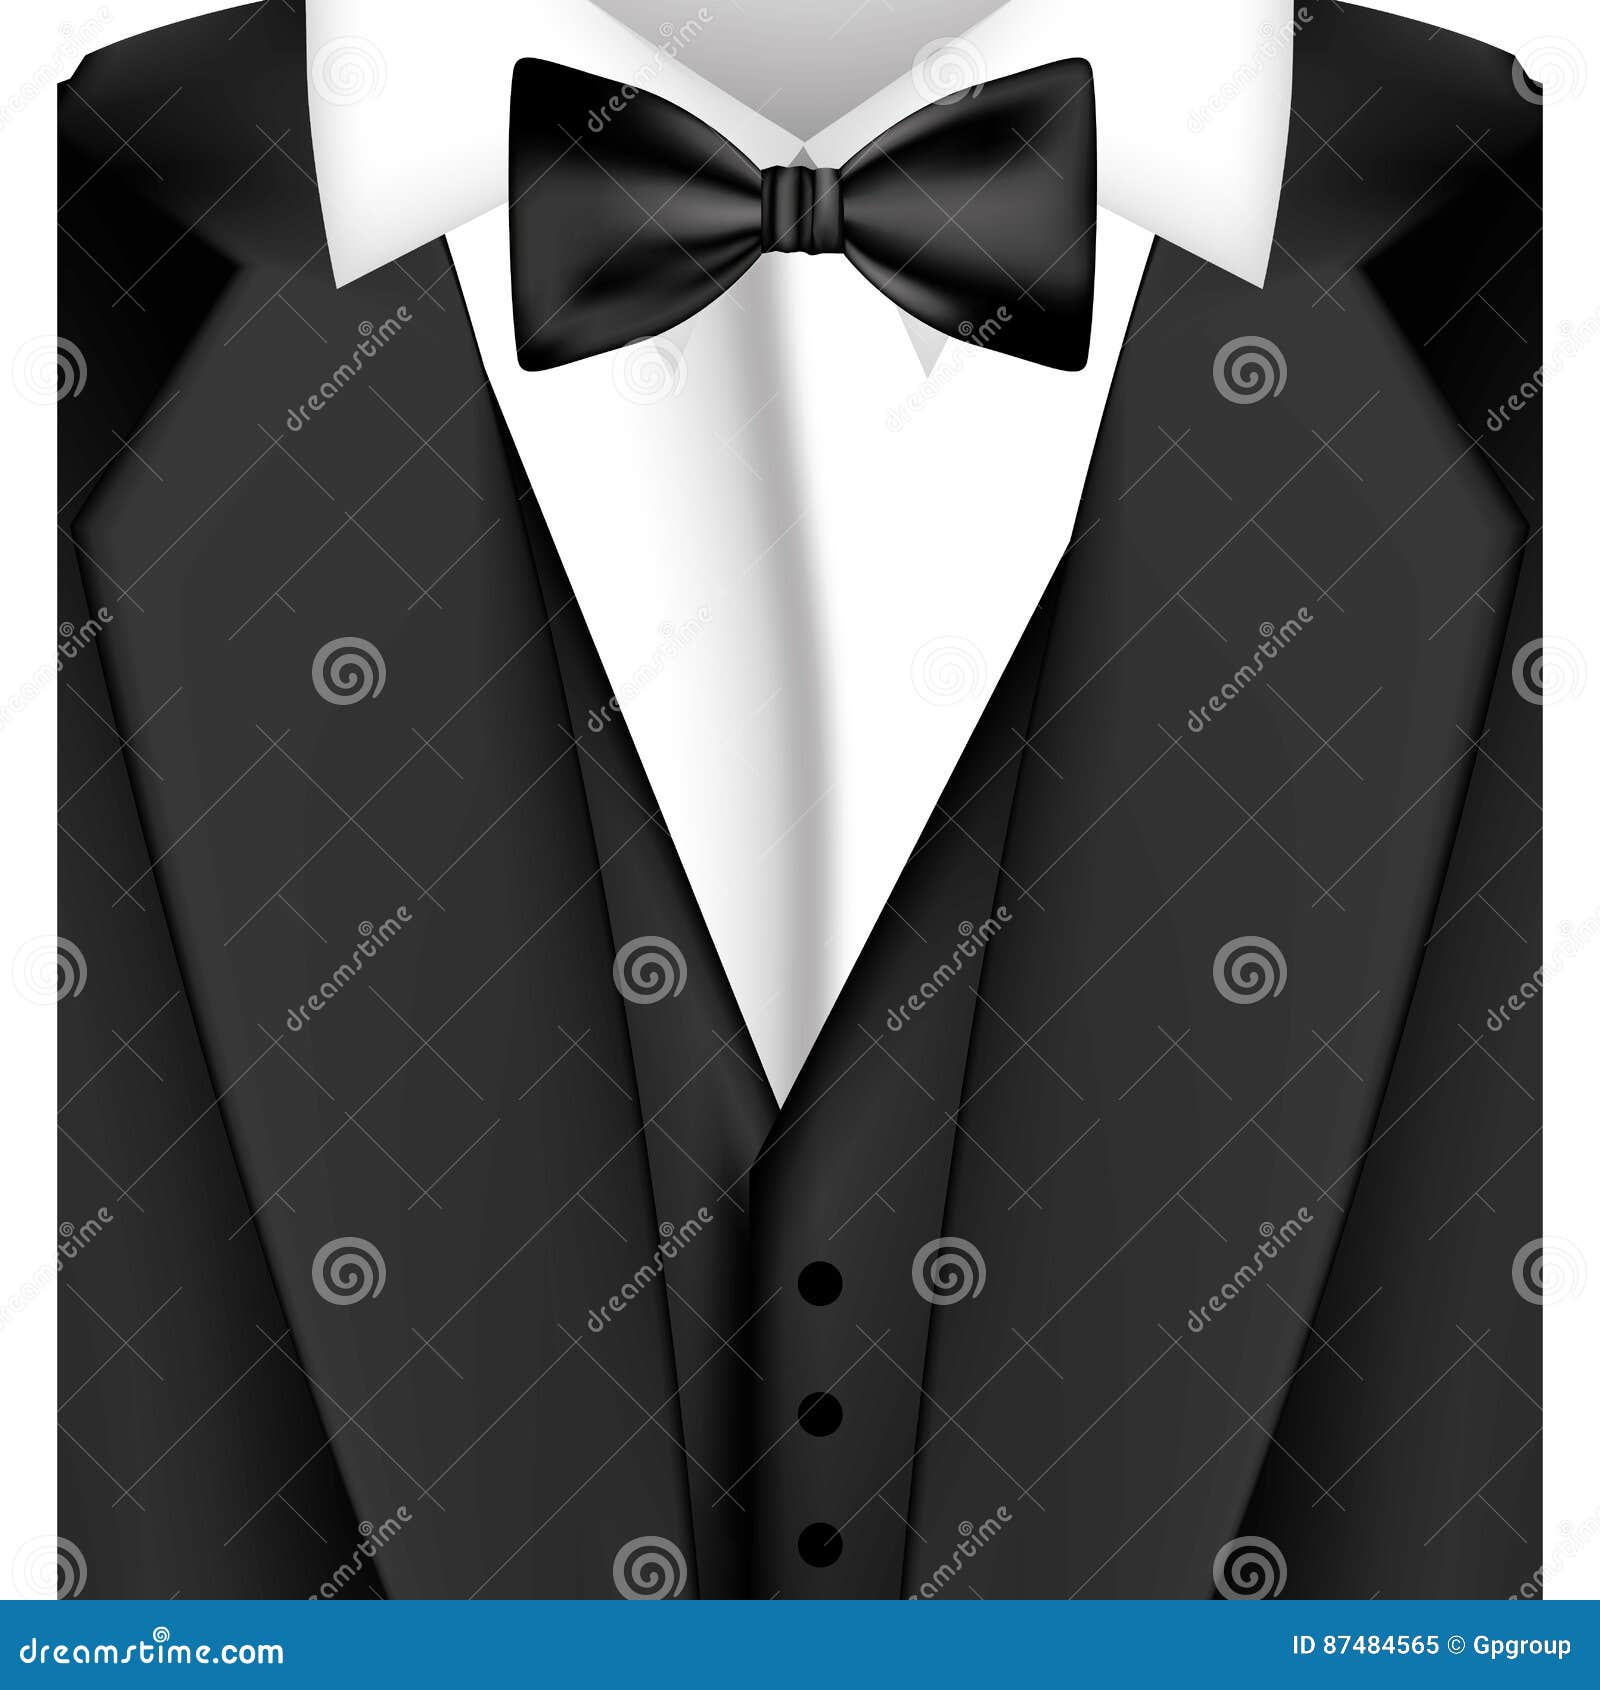 Colorful Sticker Suit with Bow Tie Icon Stock Illustration ...